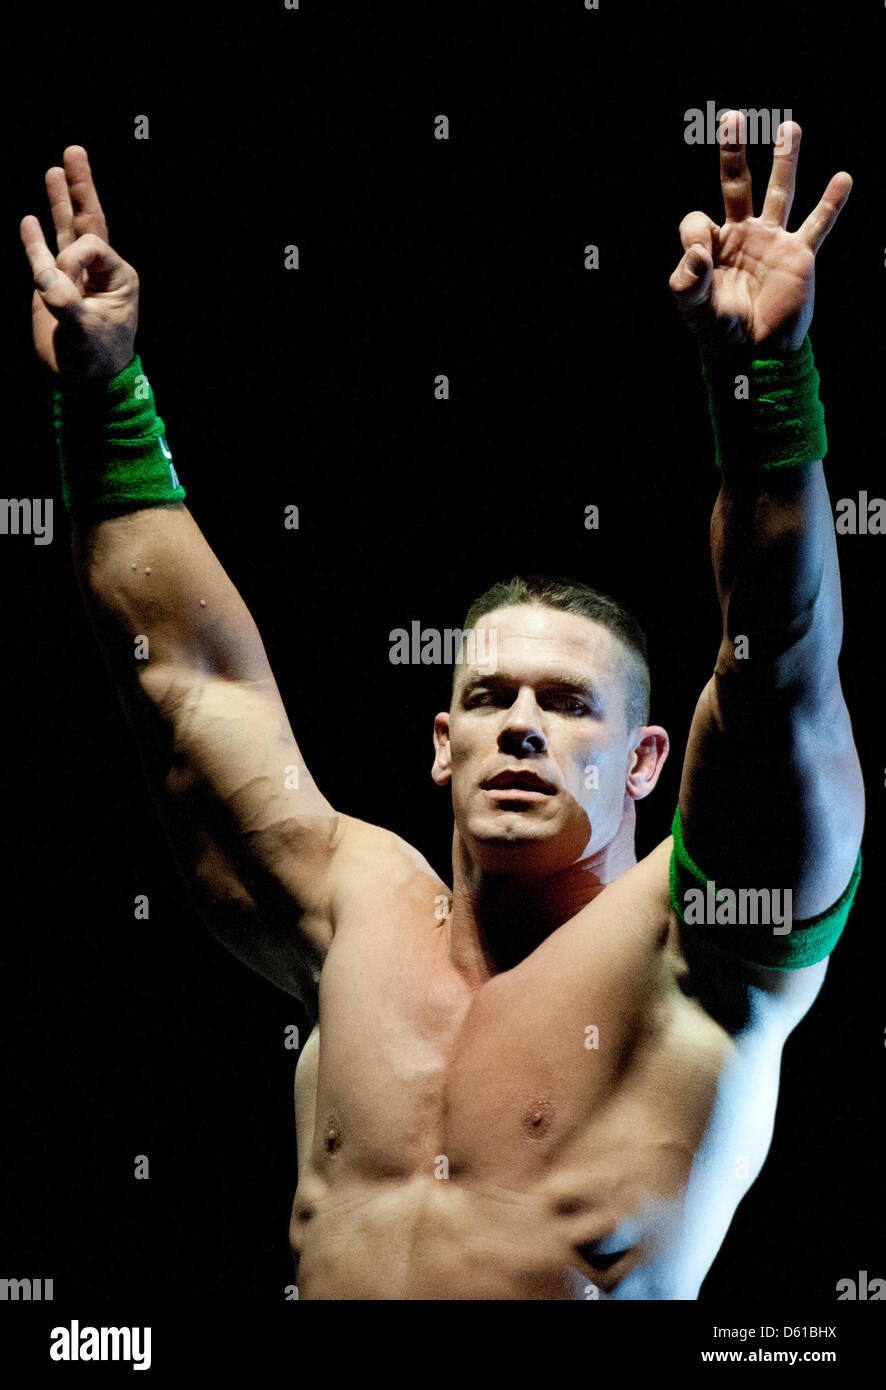 US-wrestler John Cena cheers during a fight at the RAW WrestleMania Revenge Tour at the o2 World canue in Berlin, Germany, 14 April 2012. The WWE (World Wrestling Entertainment) celebrates its 20th German anniversary this April. The first show in Germany was staged in Kiel, Germany, in April 1992. Photo: Sebastian Kahnert Stock Photo